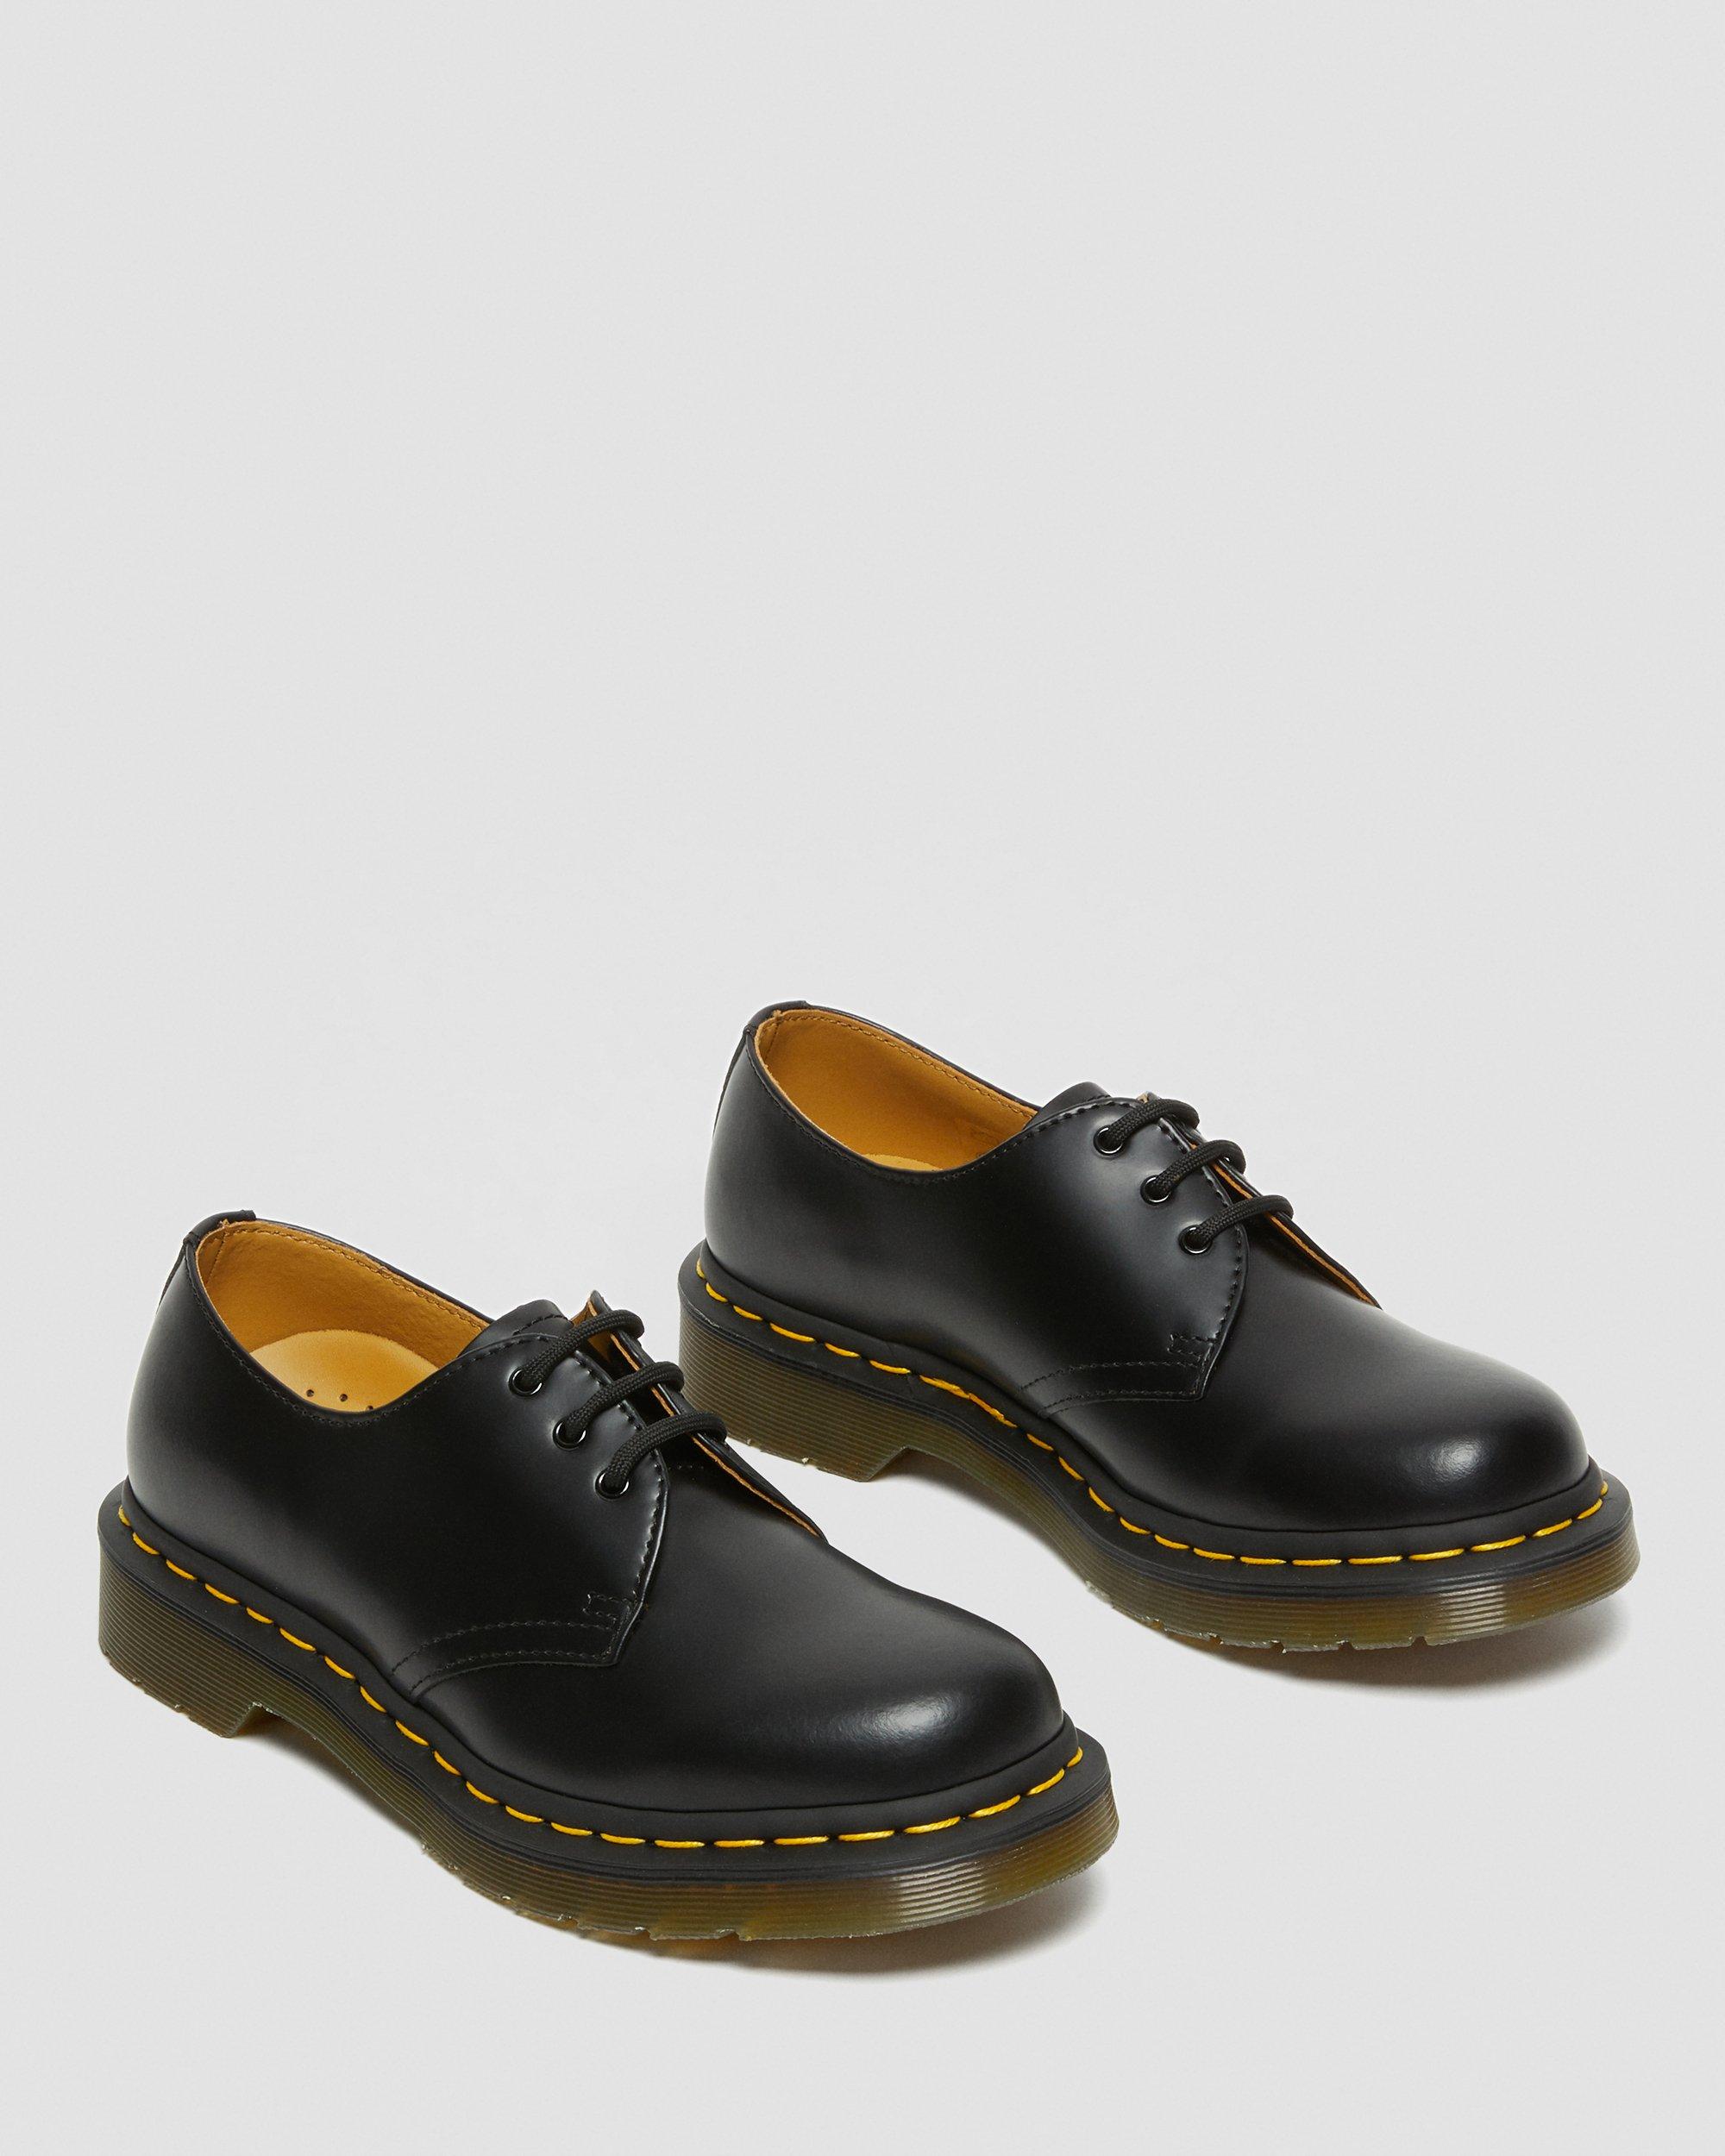 smokkel fontein opbouwen 1461 Women's Smooth Leather Oxford Shoes | Dr. Martens